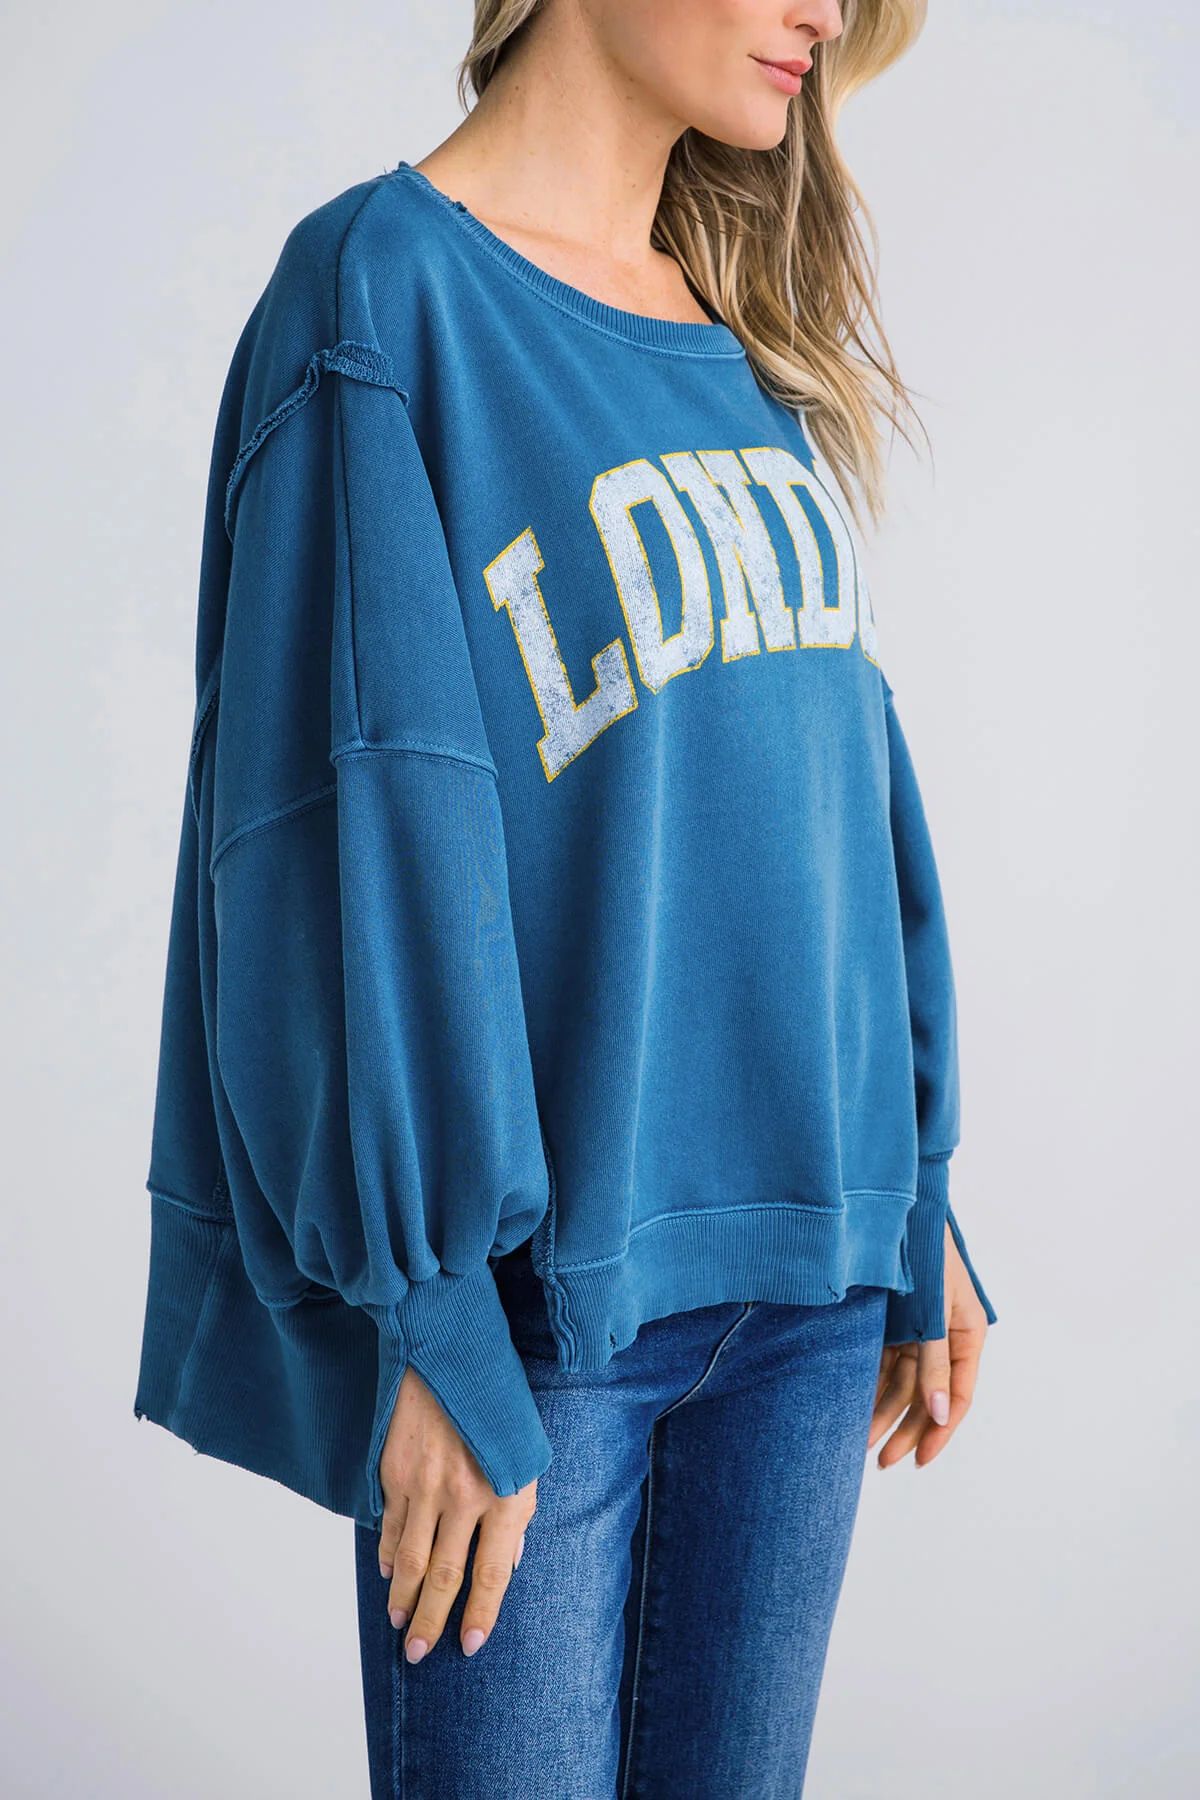 Free People Graphic Camden Pullover | Social Threads